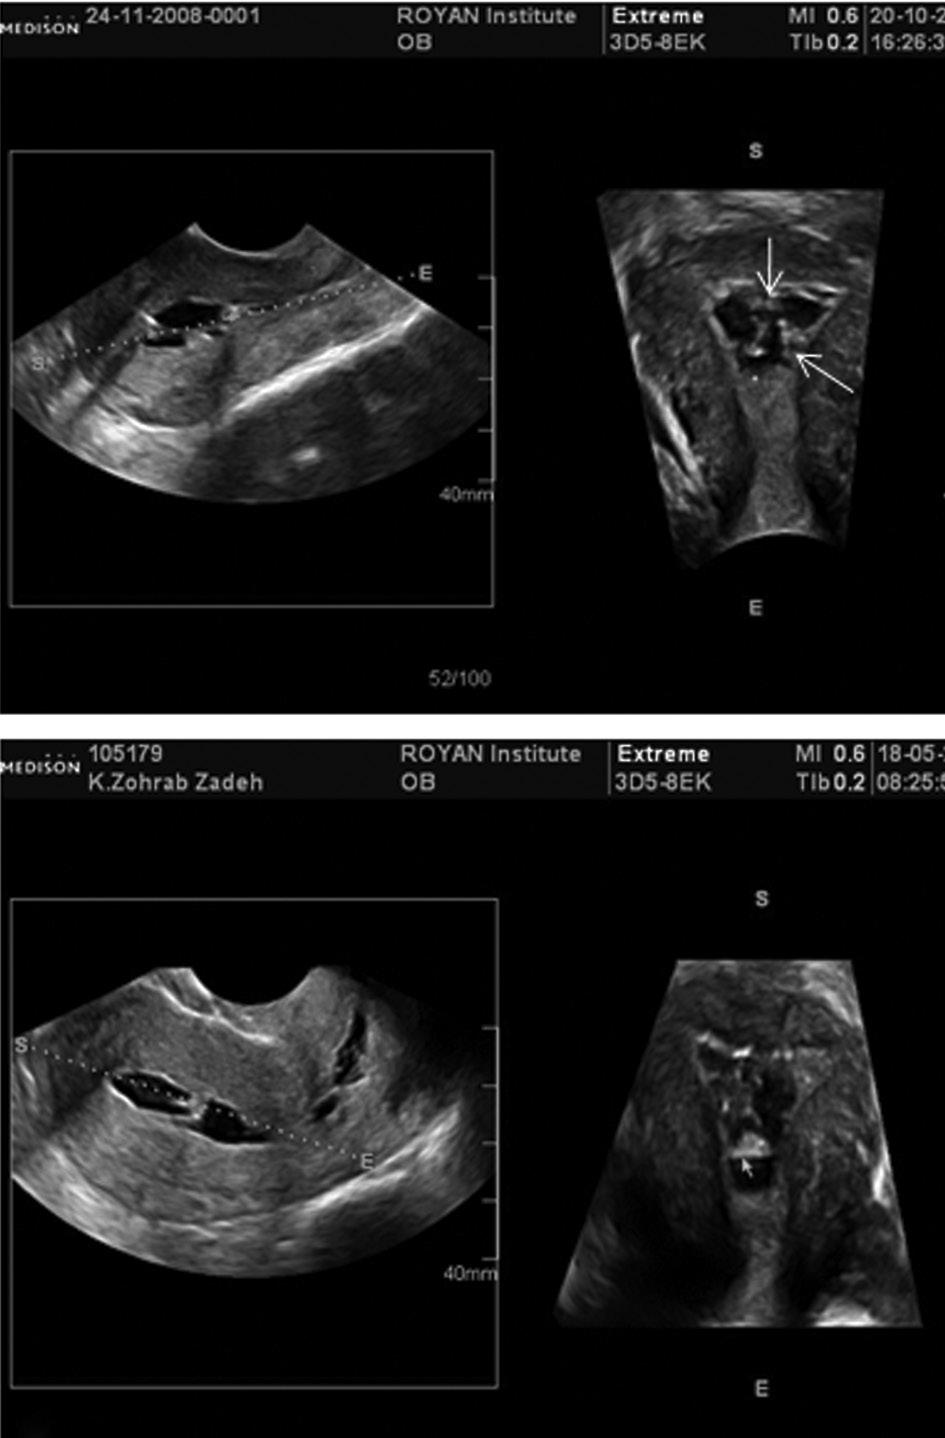 3DXI Sonohysterographic Evaluation of Intracavitary Pathologies Endometrial hyperplasia may be suspected sonographically.